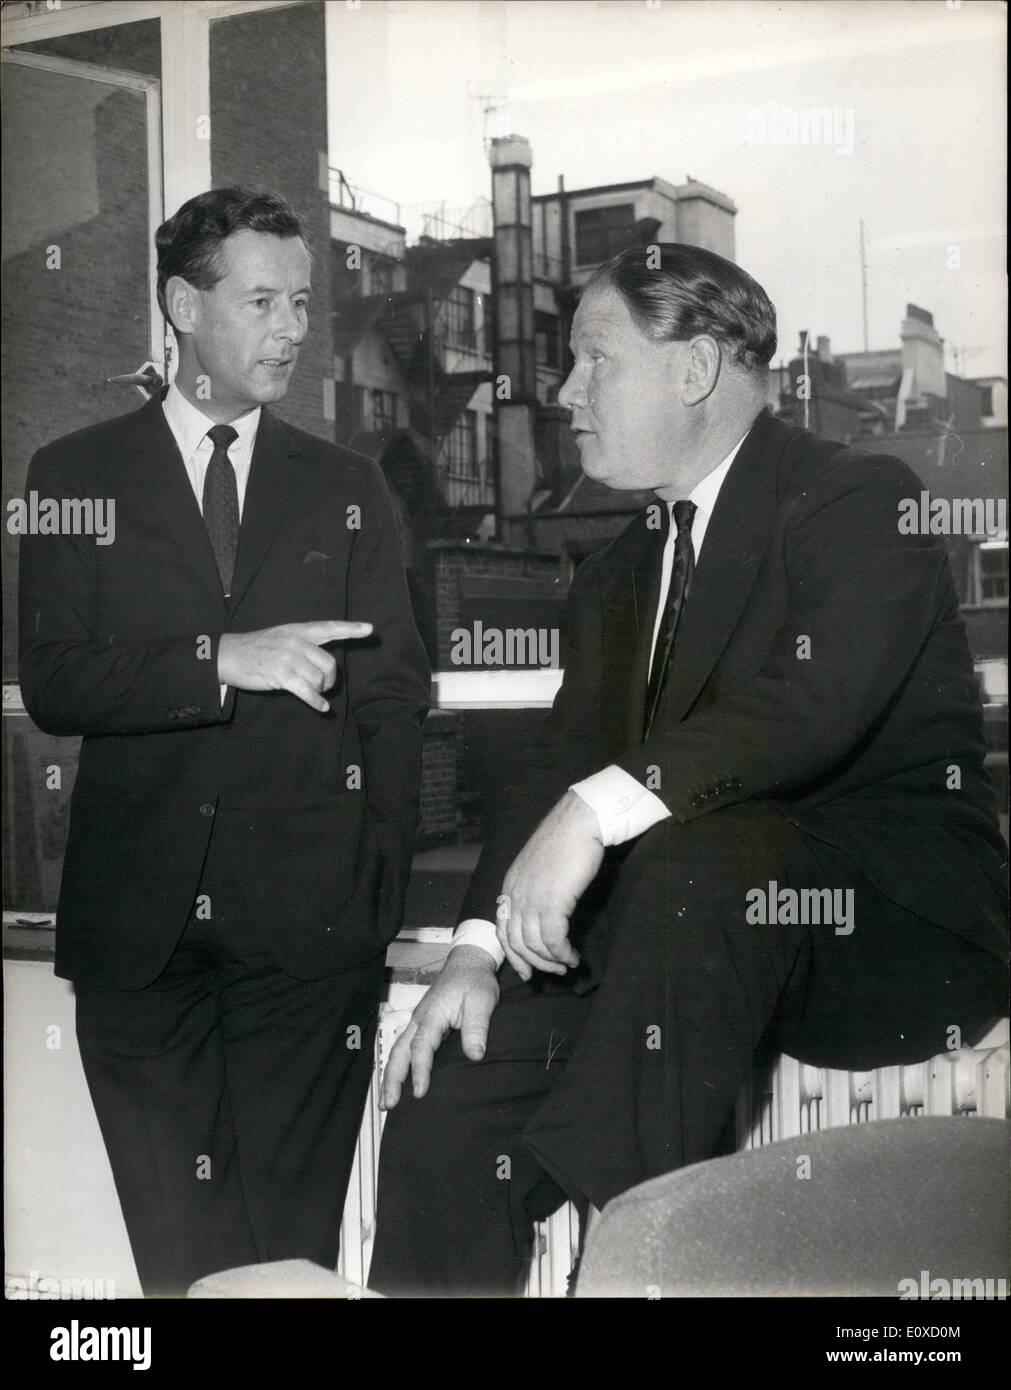 Apr. 04, 1966 - Group Captain Townsend Starts Work In London: Group Captain Peter Townsend, 51, the former Royal equerry, who has lived abroad for the past 13 years, this morning started work for the London public relations firm of Hodgkinson Partners. Photo shows Group Captain Peter Townsend, talks to Mr. Colin Hodgkinson, the chairman of Hodgkinson-Partners - on his first morning. Stock Photo